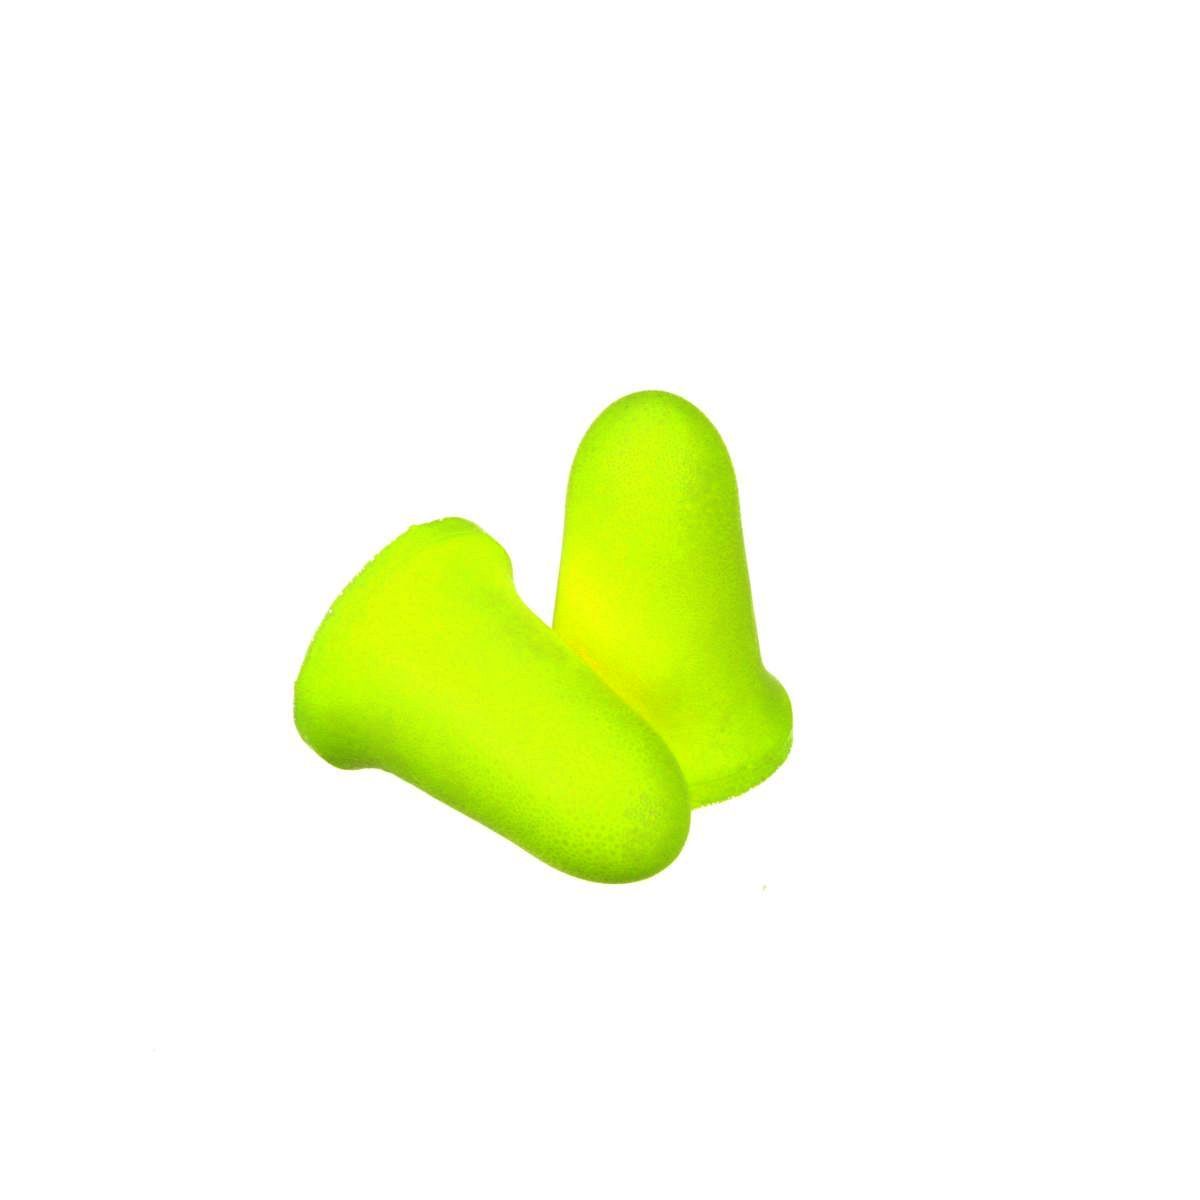 50 Pairs of E.A.R Earsoft FX Ear Plugs by 3M